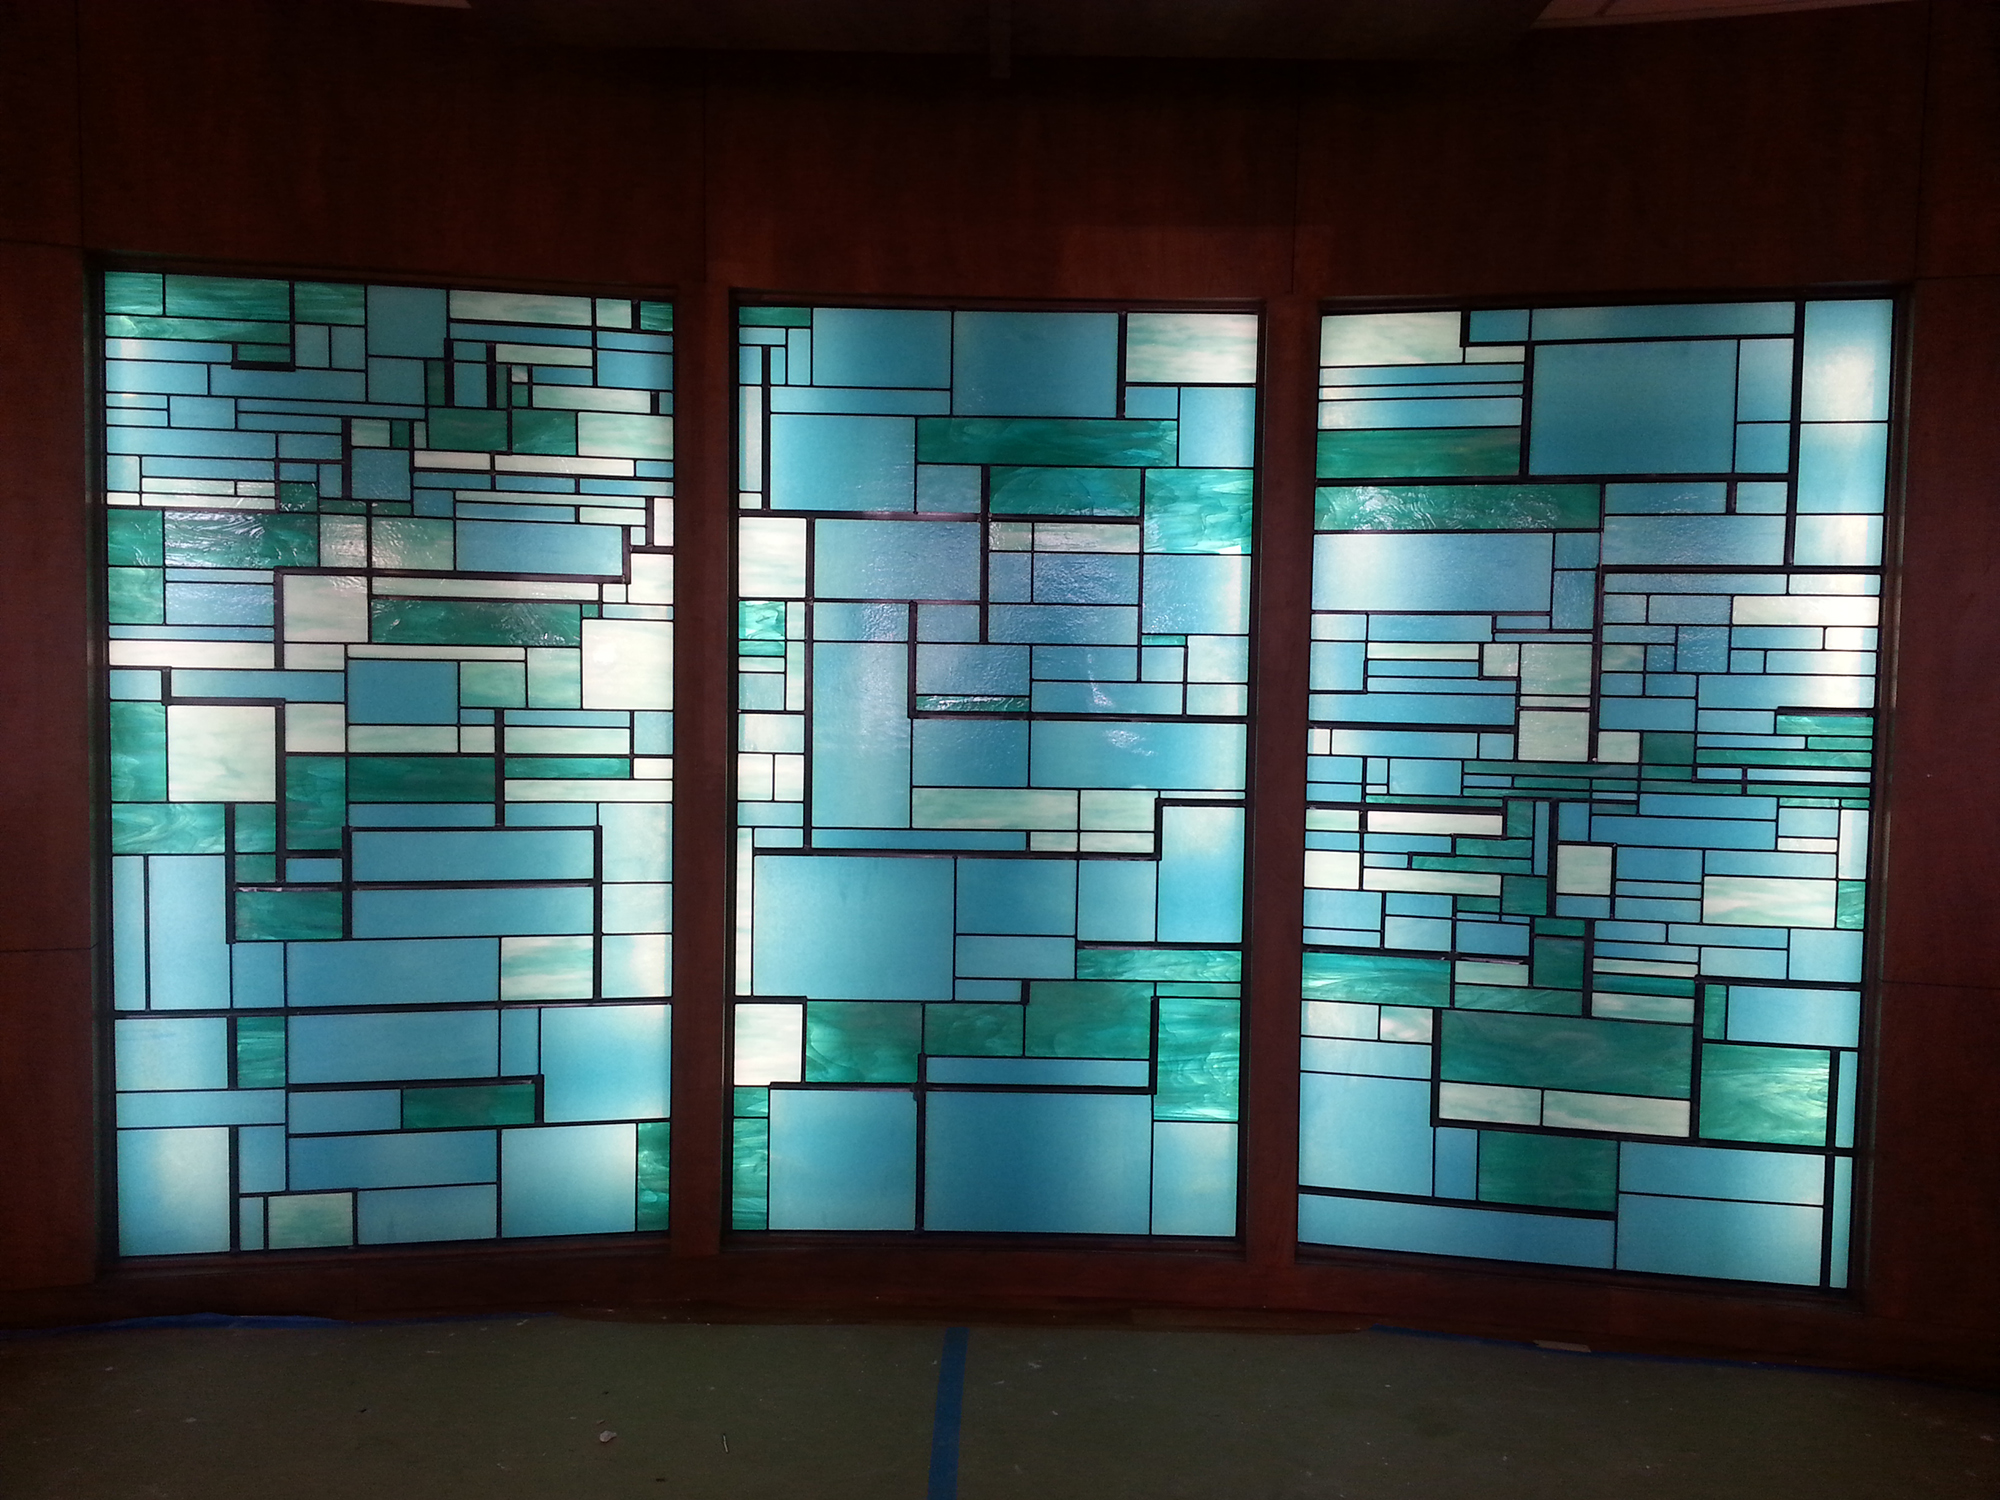 3 rectangular stained glass windows with modern, linear design. Hues of blue, green and white